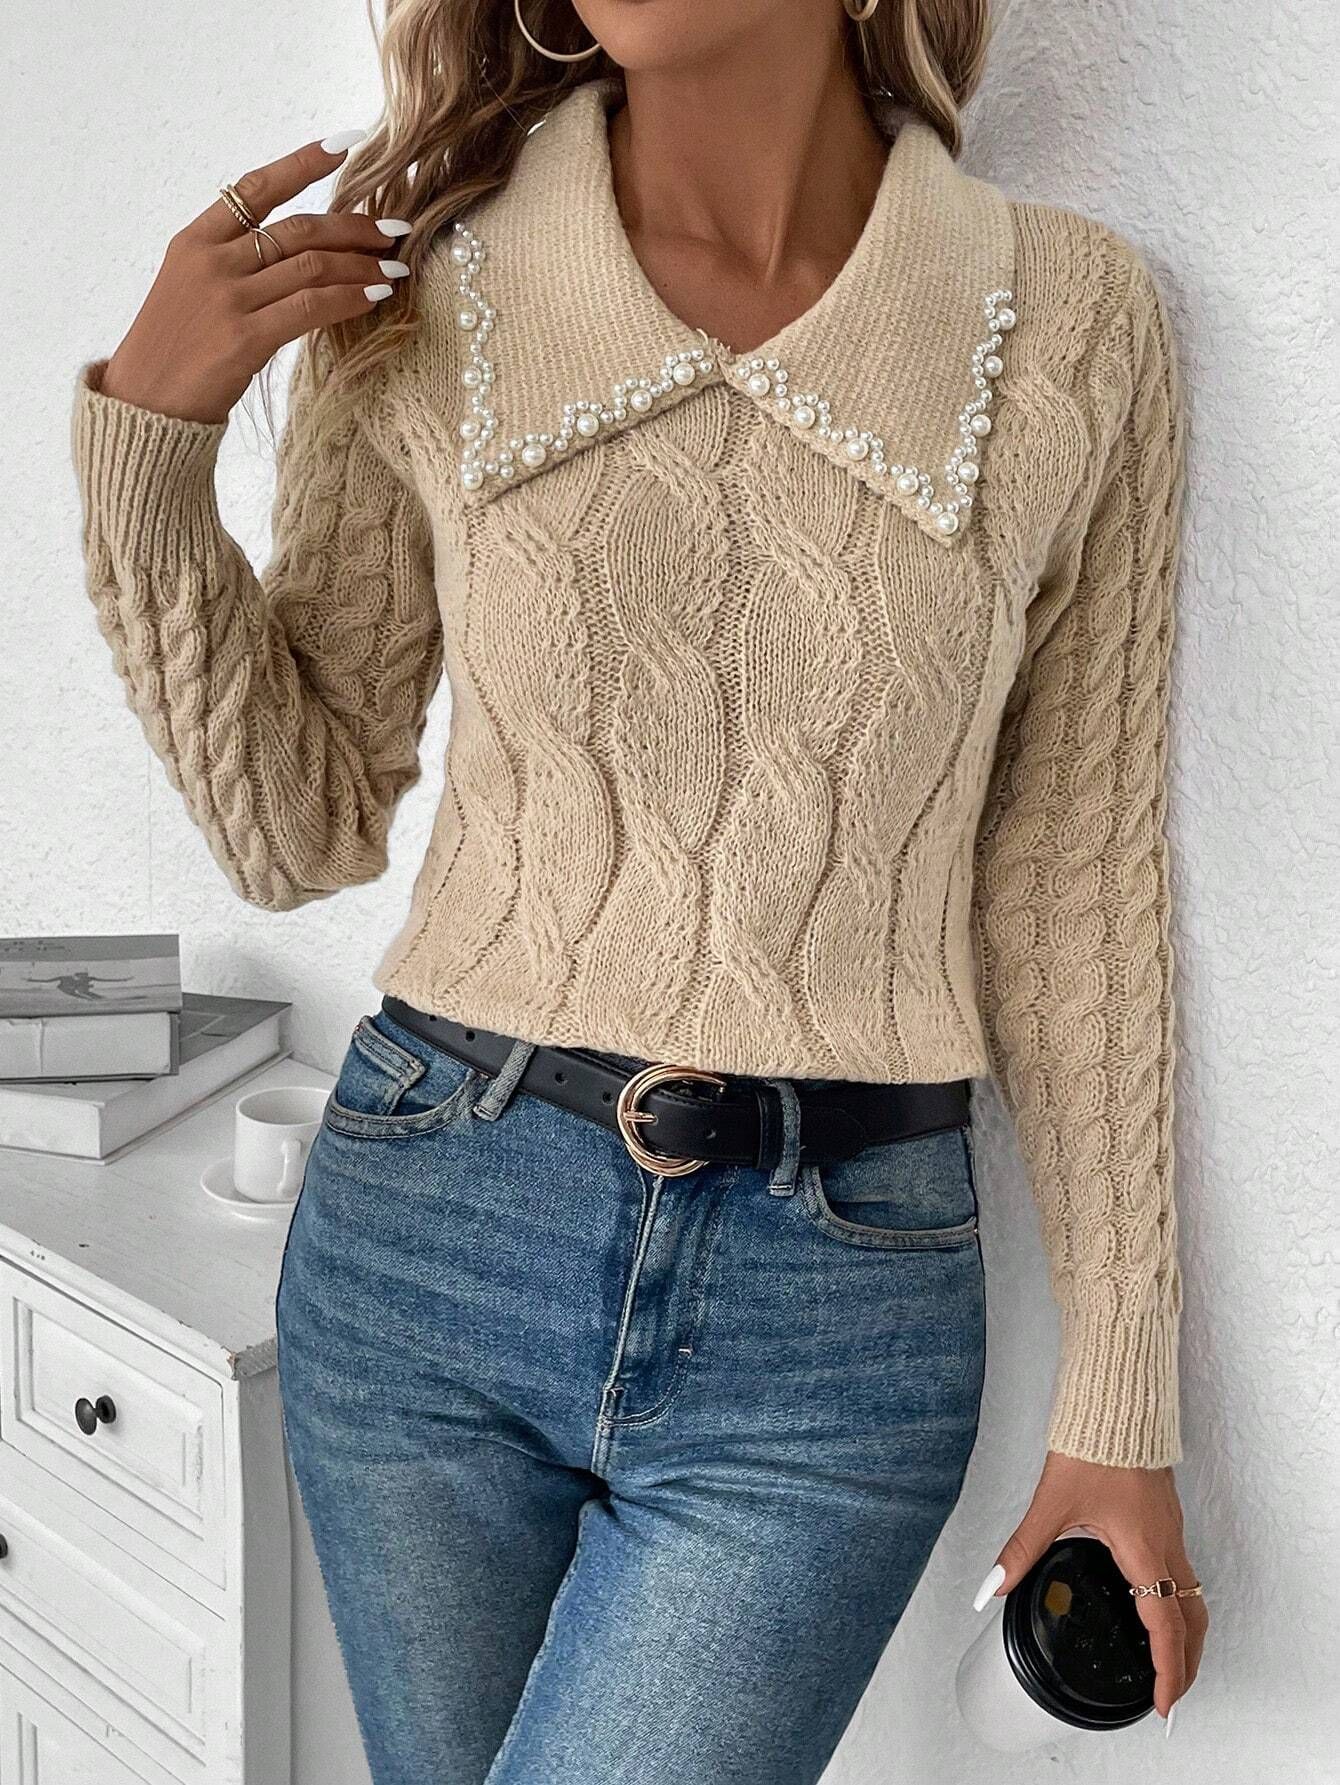 SHEIN Essnce Pearls Beaded Collar Cable Knit Sweater | SHEIN